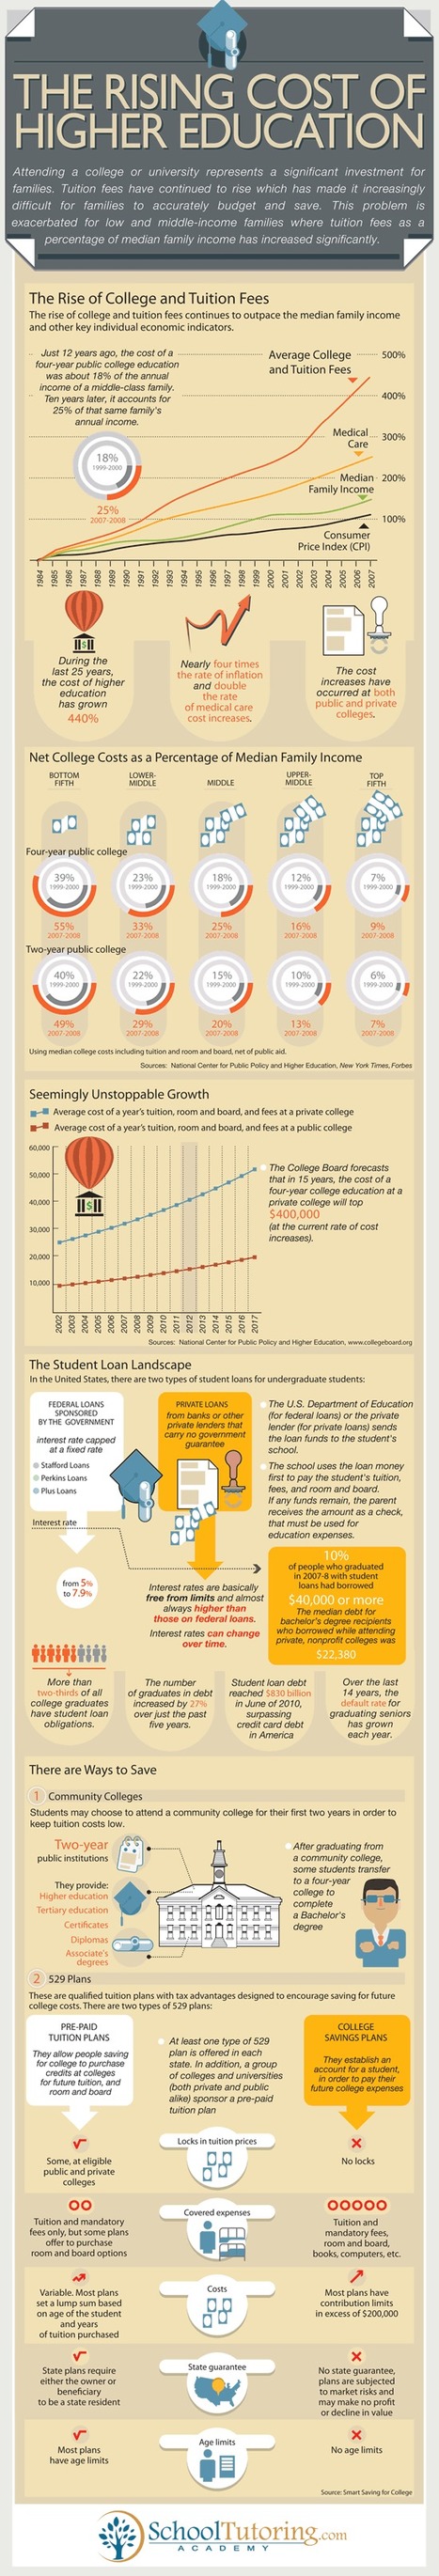 Case Study: How Education Cost has Grown up Quickly in Recent Times [Infographic] | All Infographics | Scoop.it